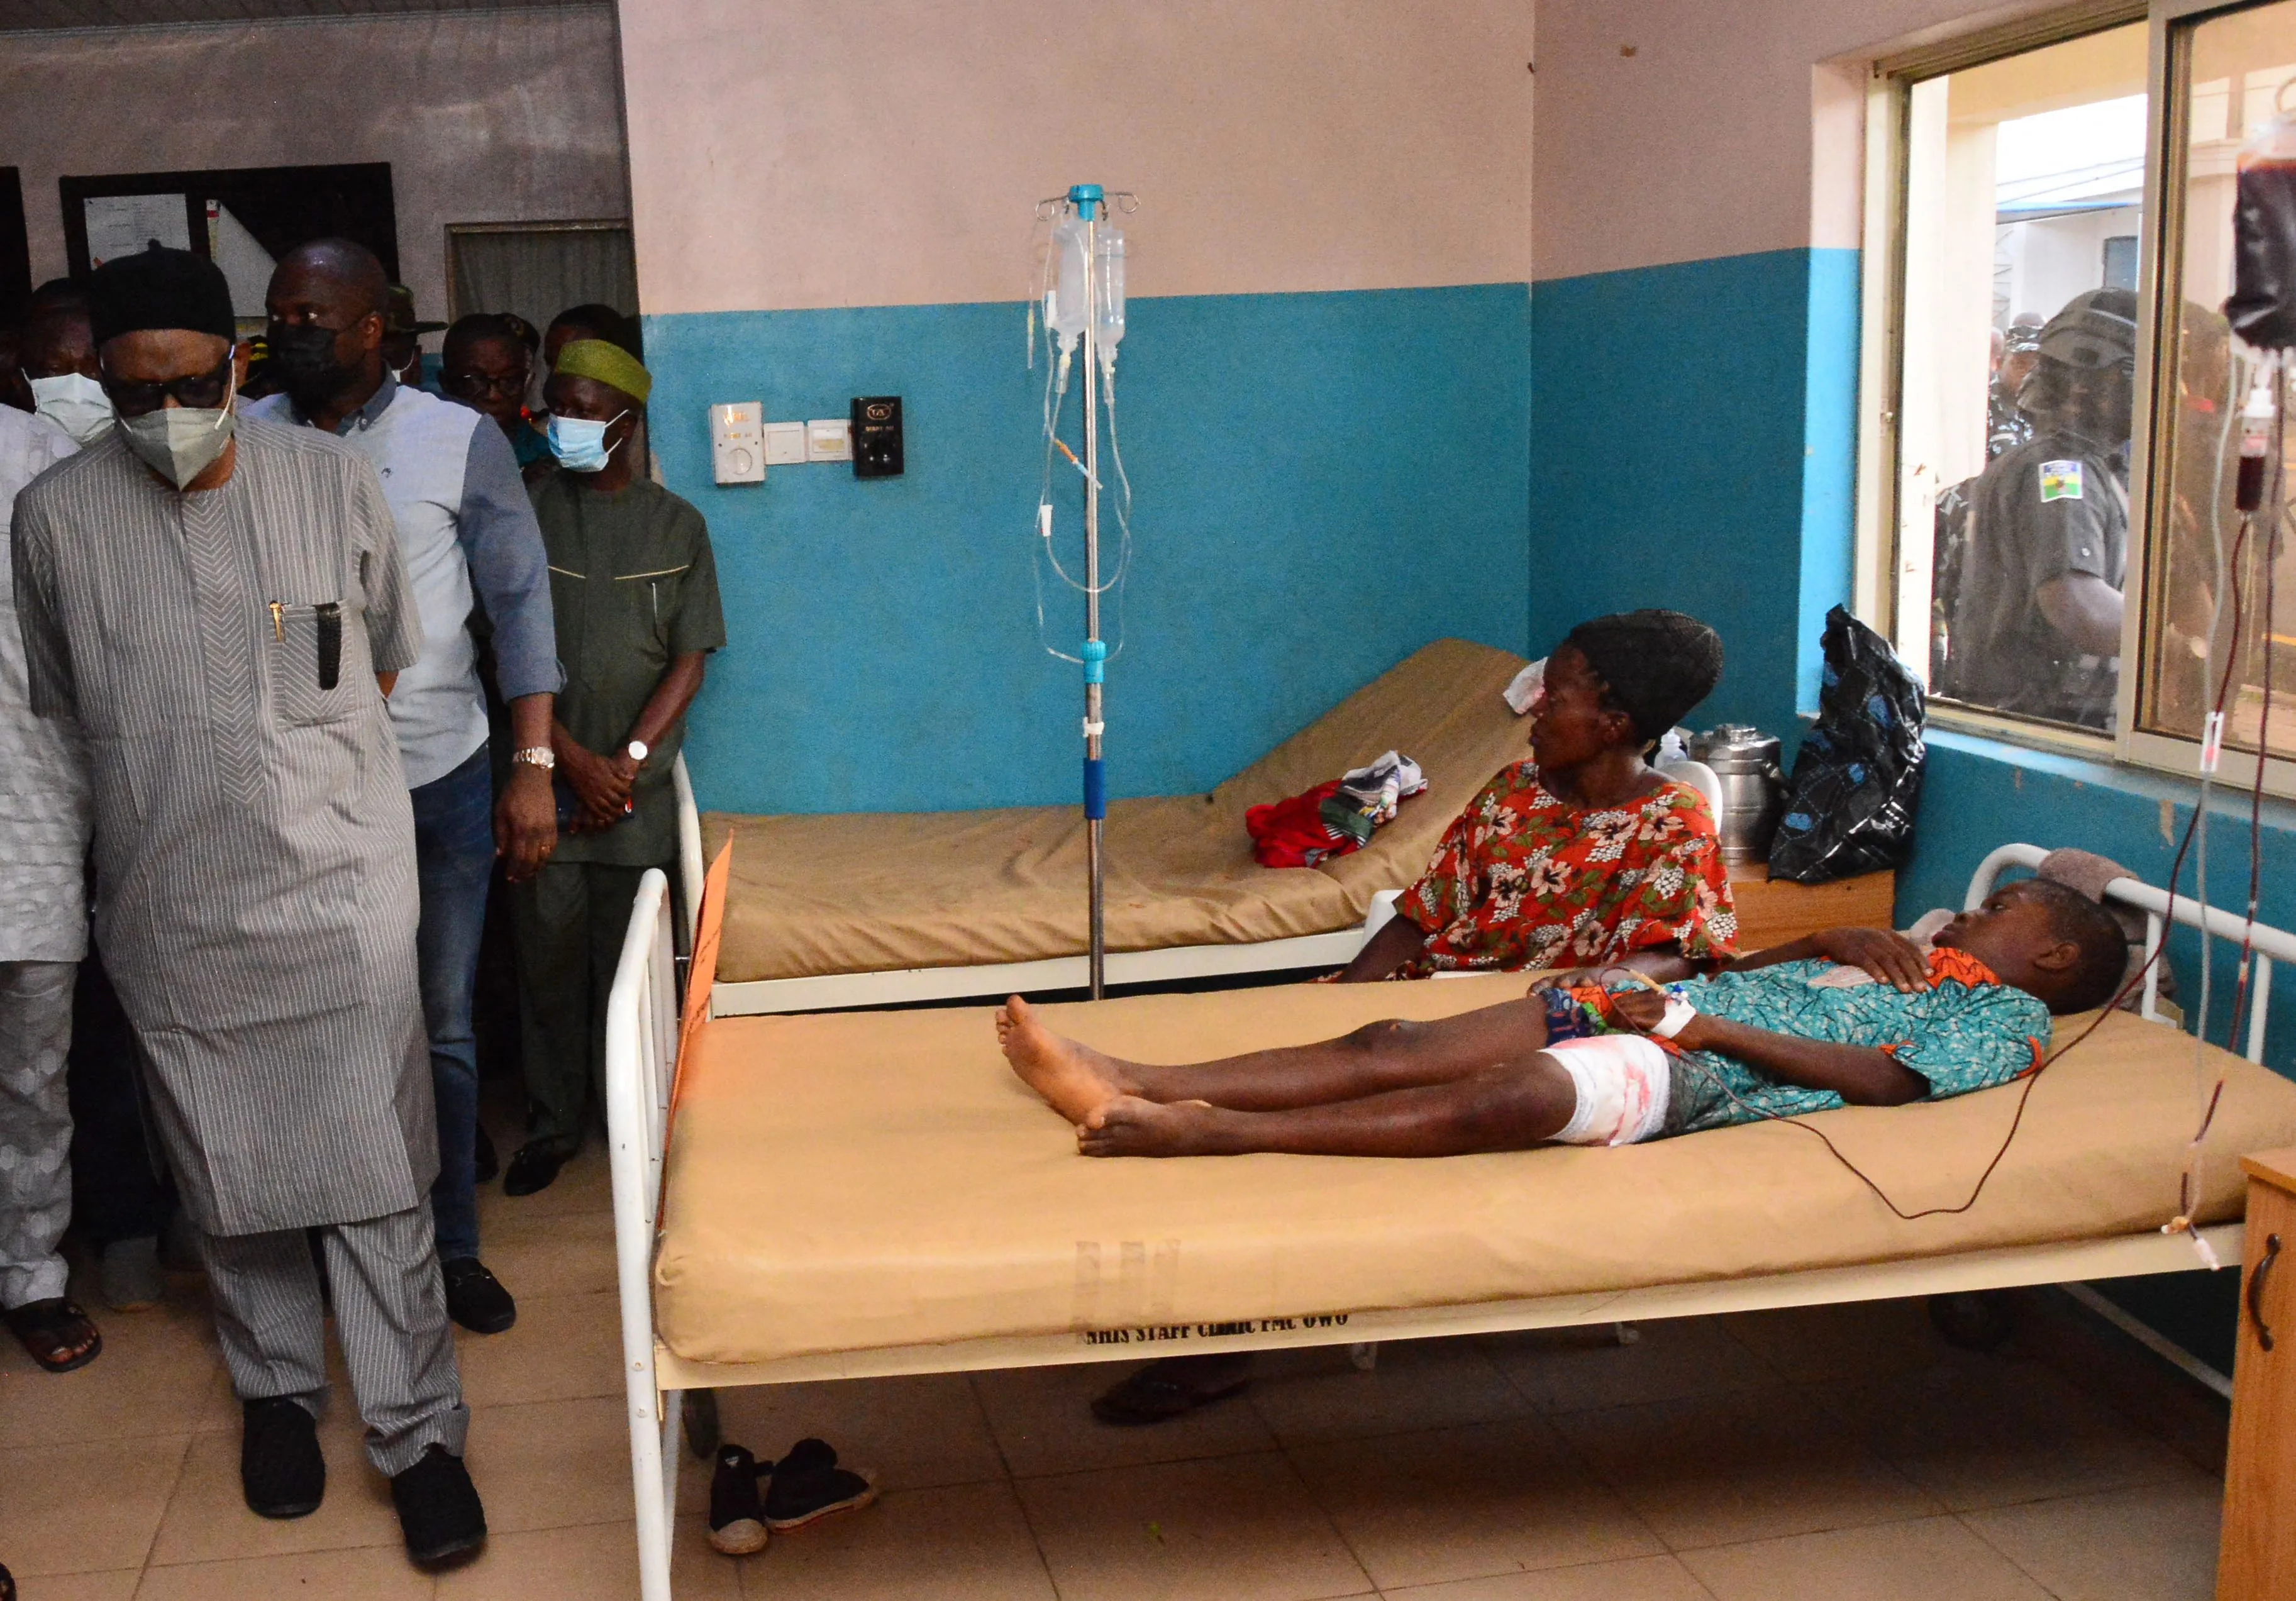 State officials walk past injured victims on hospital beds being treated for wounds following an attack by gunmen at St. Francis Xavier Catholic Church in Owo, southwest Nigeria, on June 5, 2022.?w=200&h=150